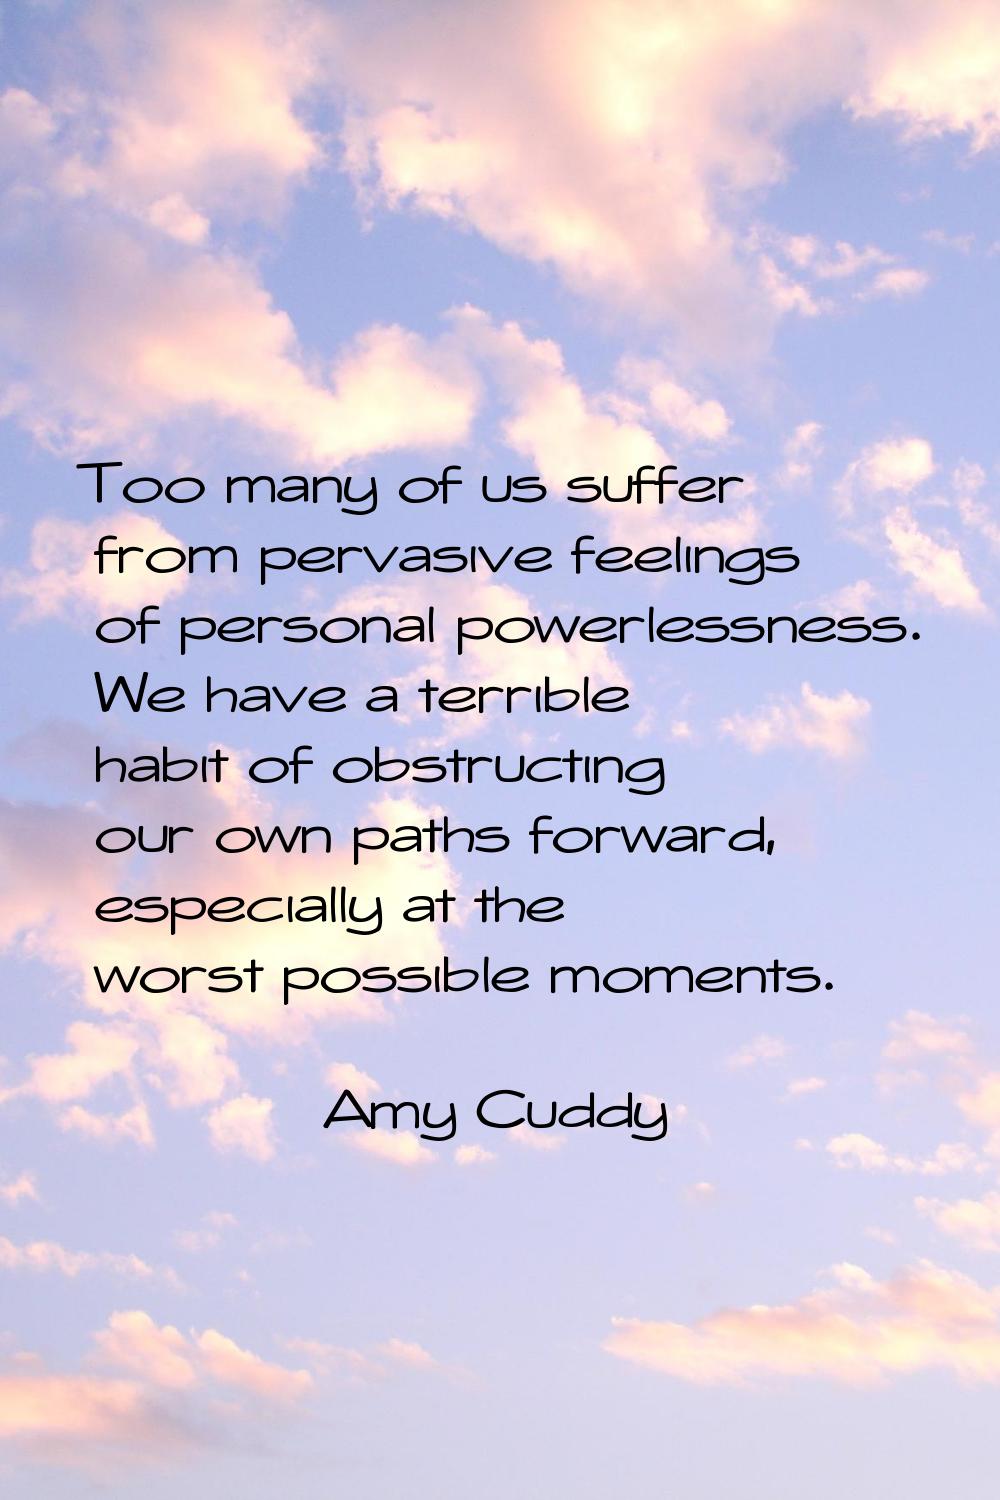 Too many of us suffer from pervasive feelings of personal powerlessness. We have a terrible habit o